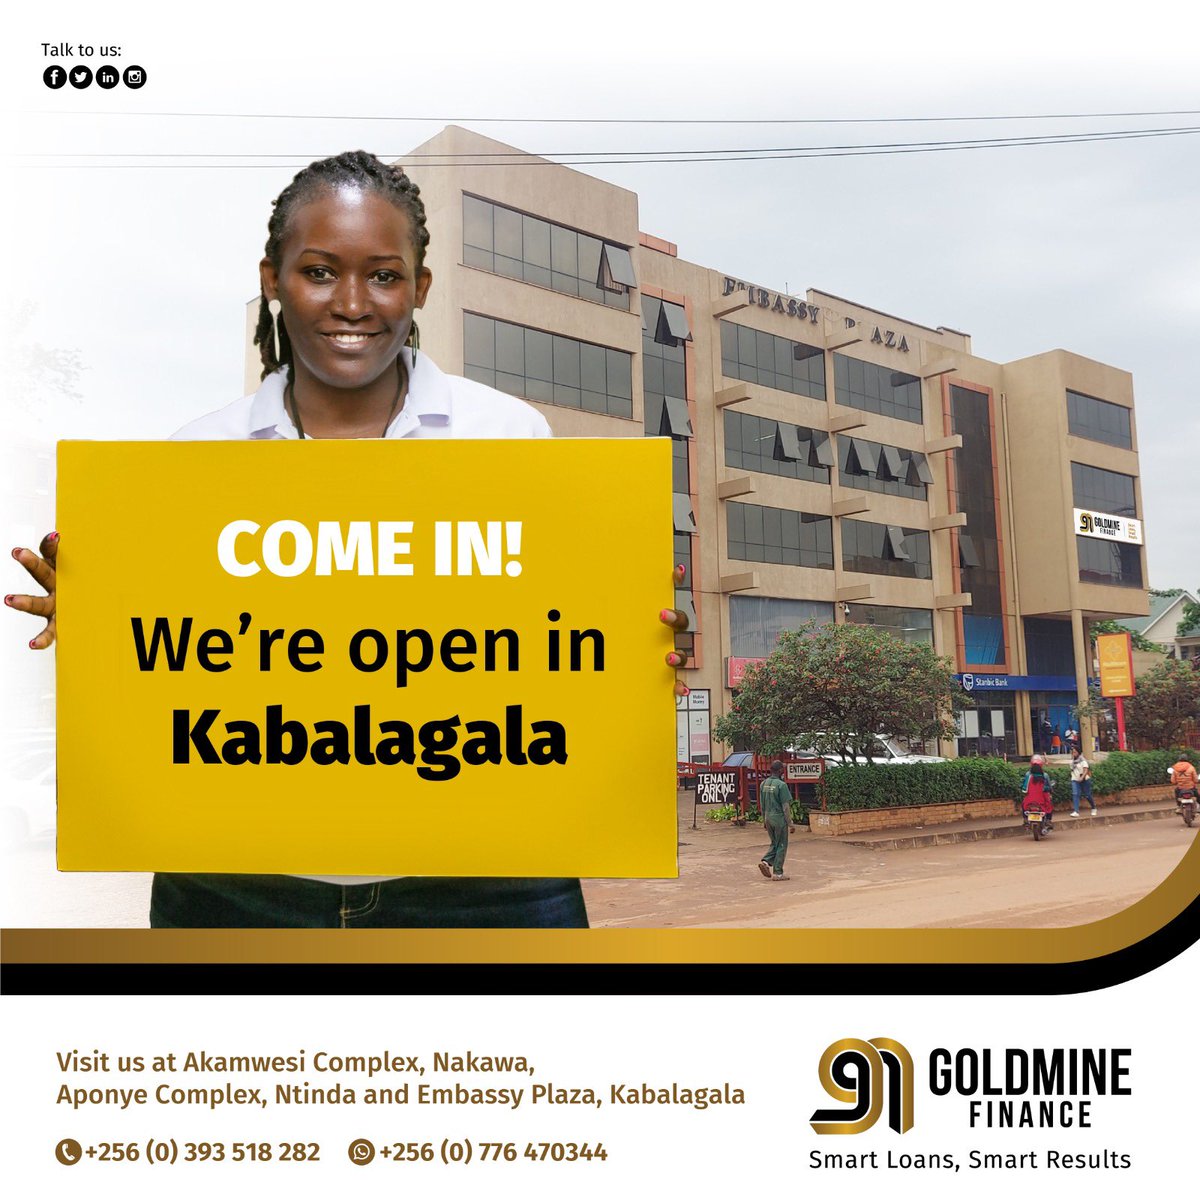 We are officially launching our new branch in Kabalagala today. You’re welcome to pop in, starting tomorrow. #GoldmineFinance #NewBranch #SmartLoansSmartResults